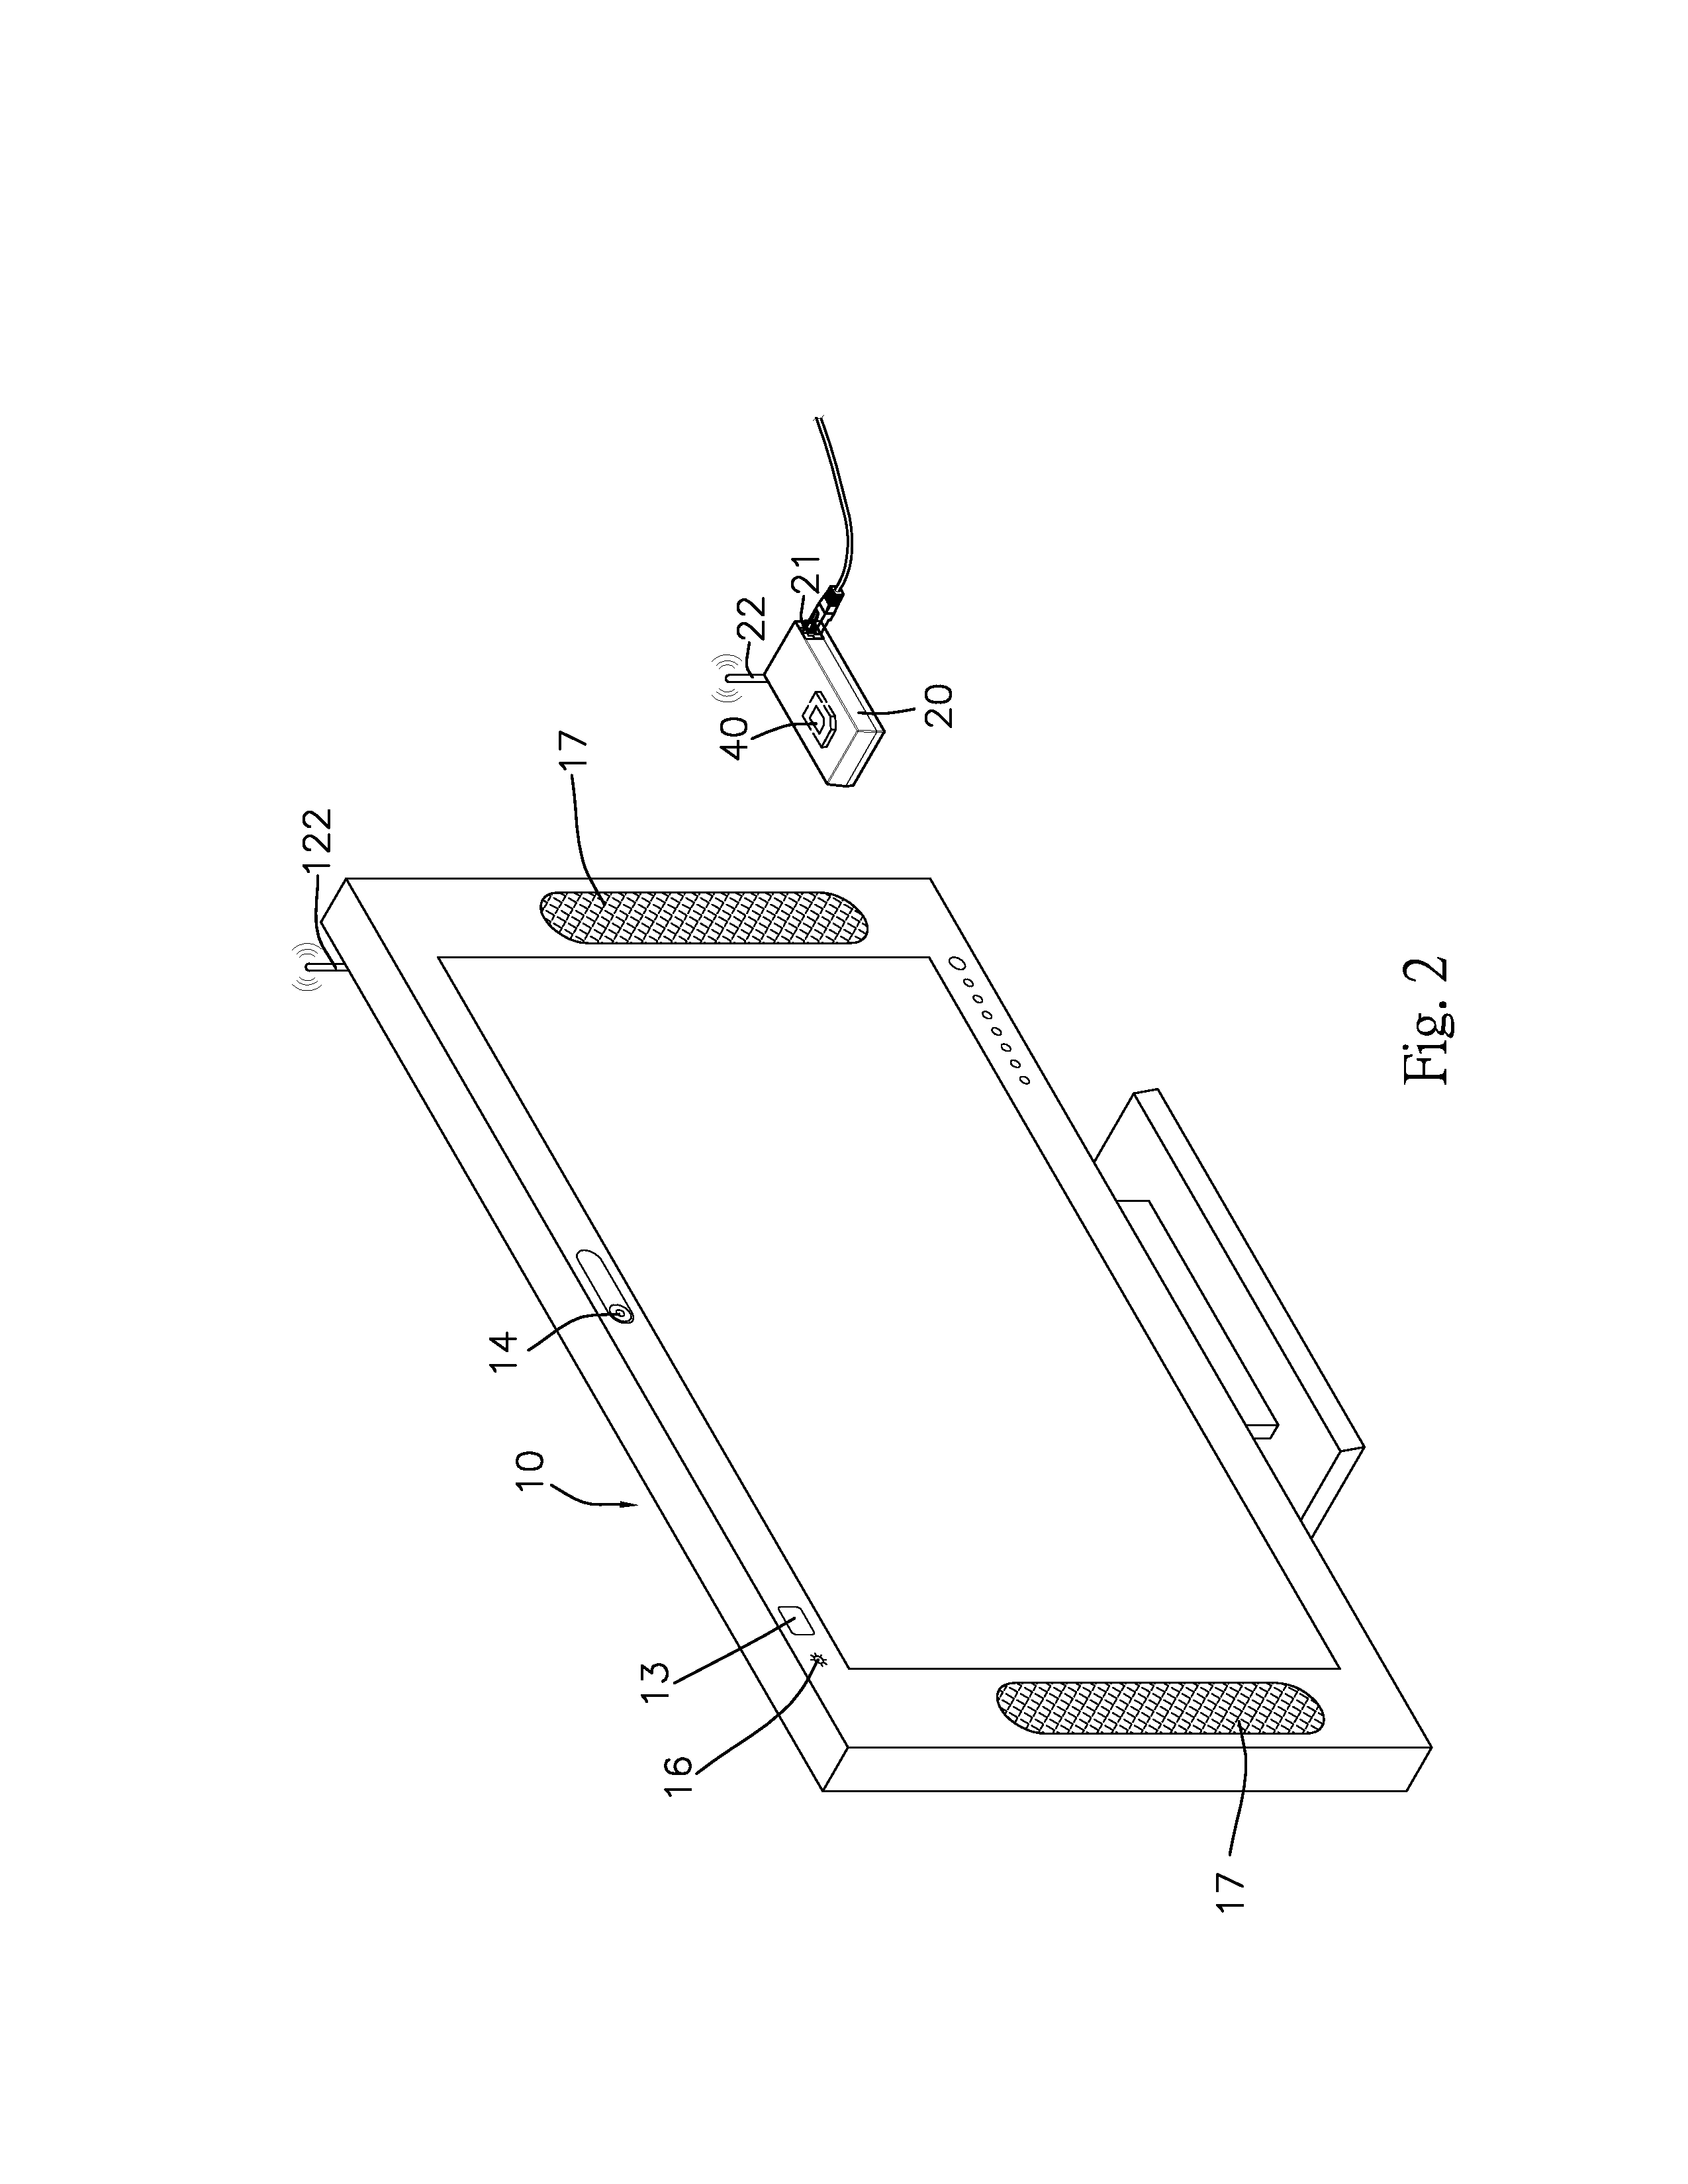 Display device with externally-connected mobile communication